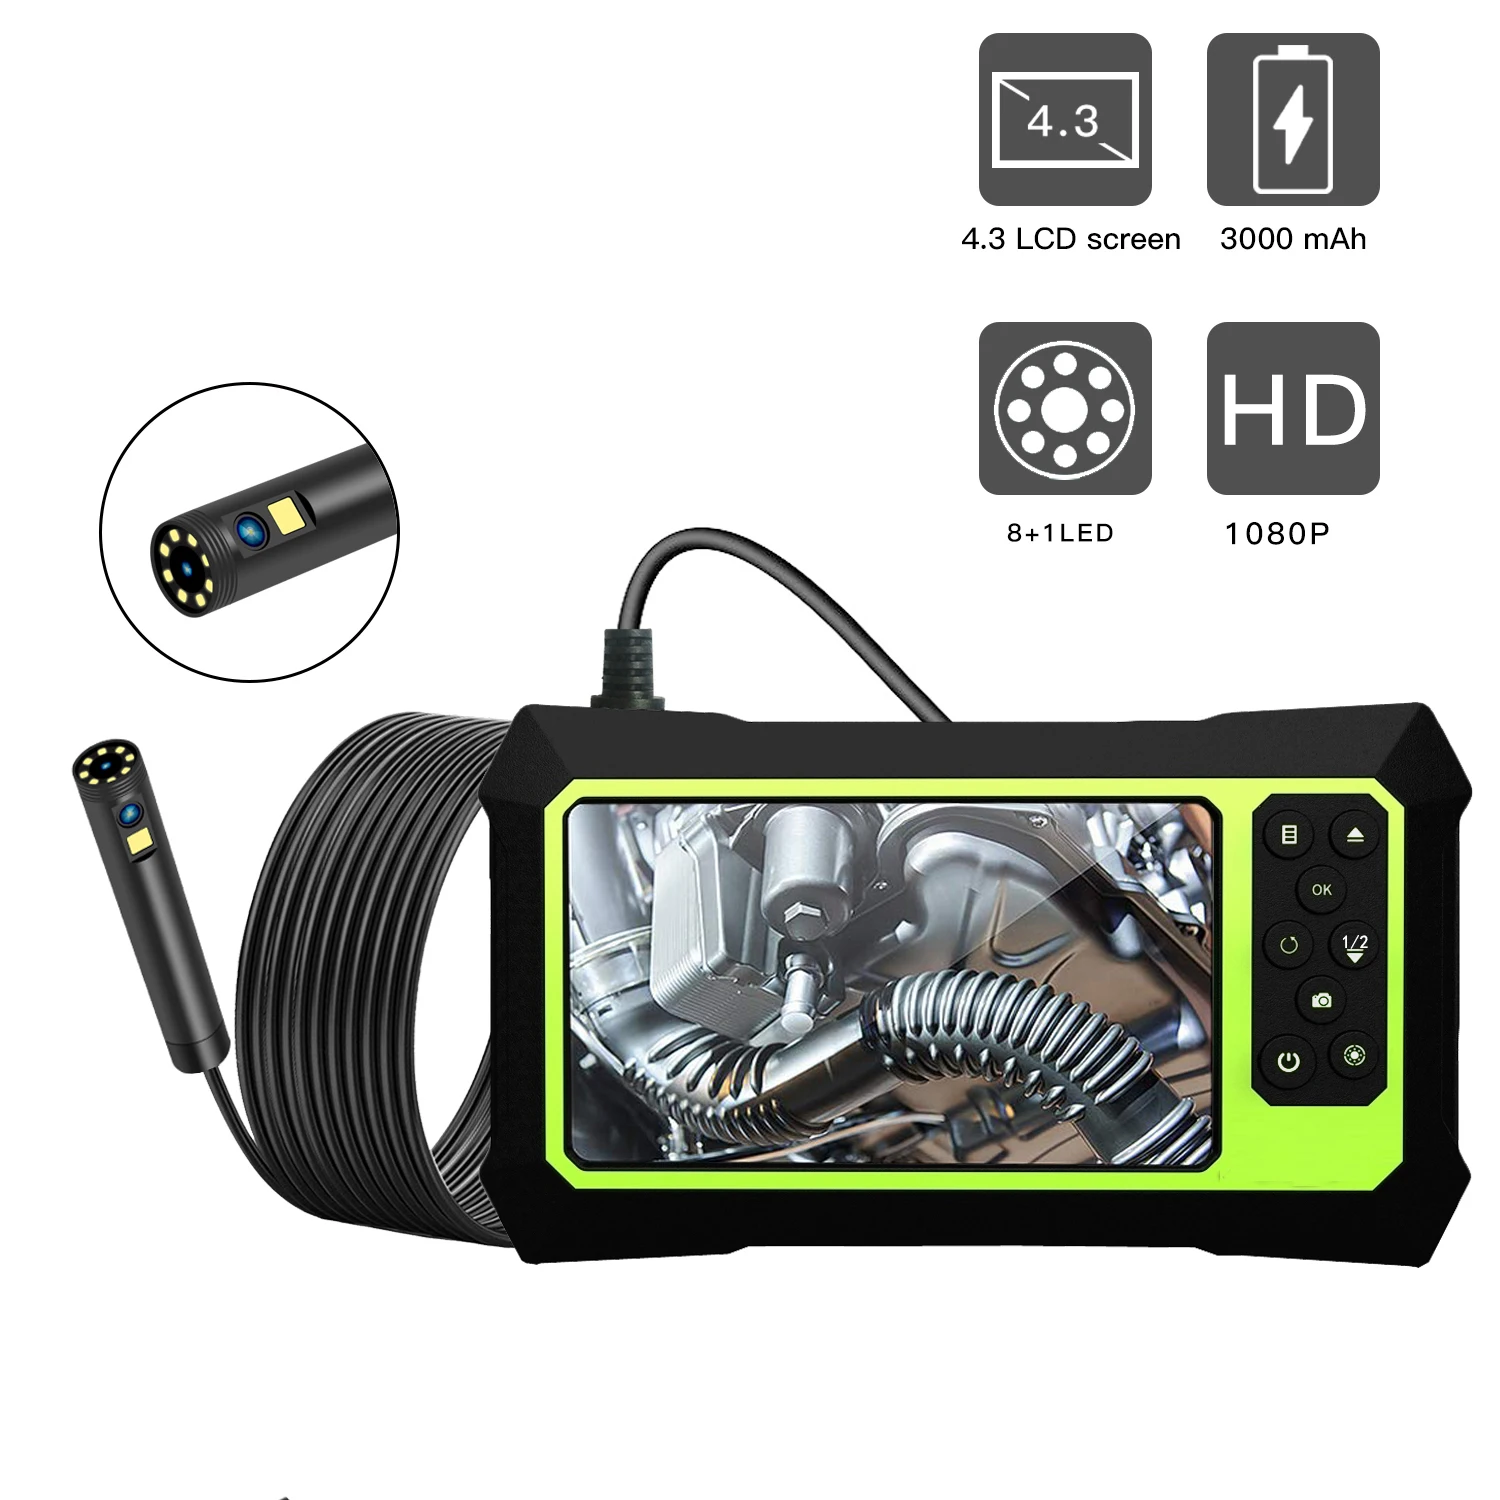 4Inch IPS Screen 2MP 1080P Dual Lens Industrial Endoscope Camera CMOS Borescope Side-View&Front View Digital Microscope Otoscope 3inch ips screen 2mp 1080p dual lens industrial endoscope camera cmos borescope side view